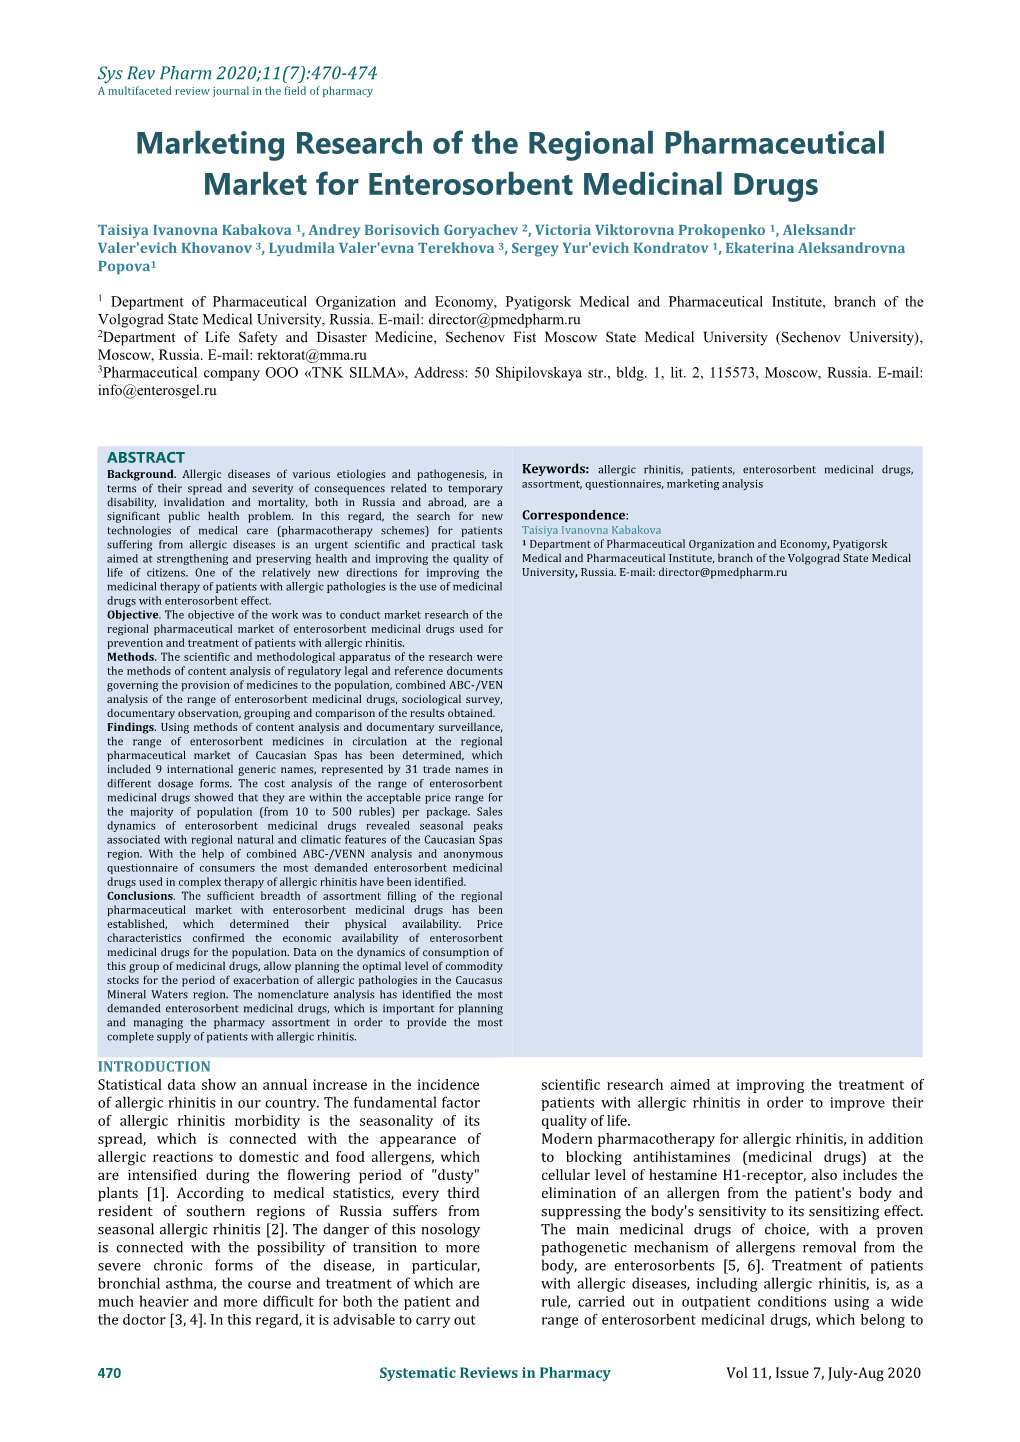 Marketing Research of the Regional Pharmaceutical Market for Enterosorbent Medicinal Drugs